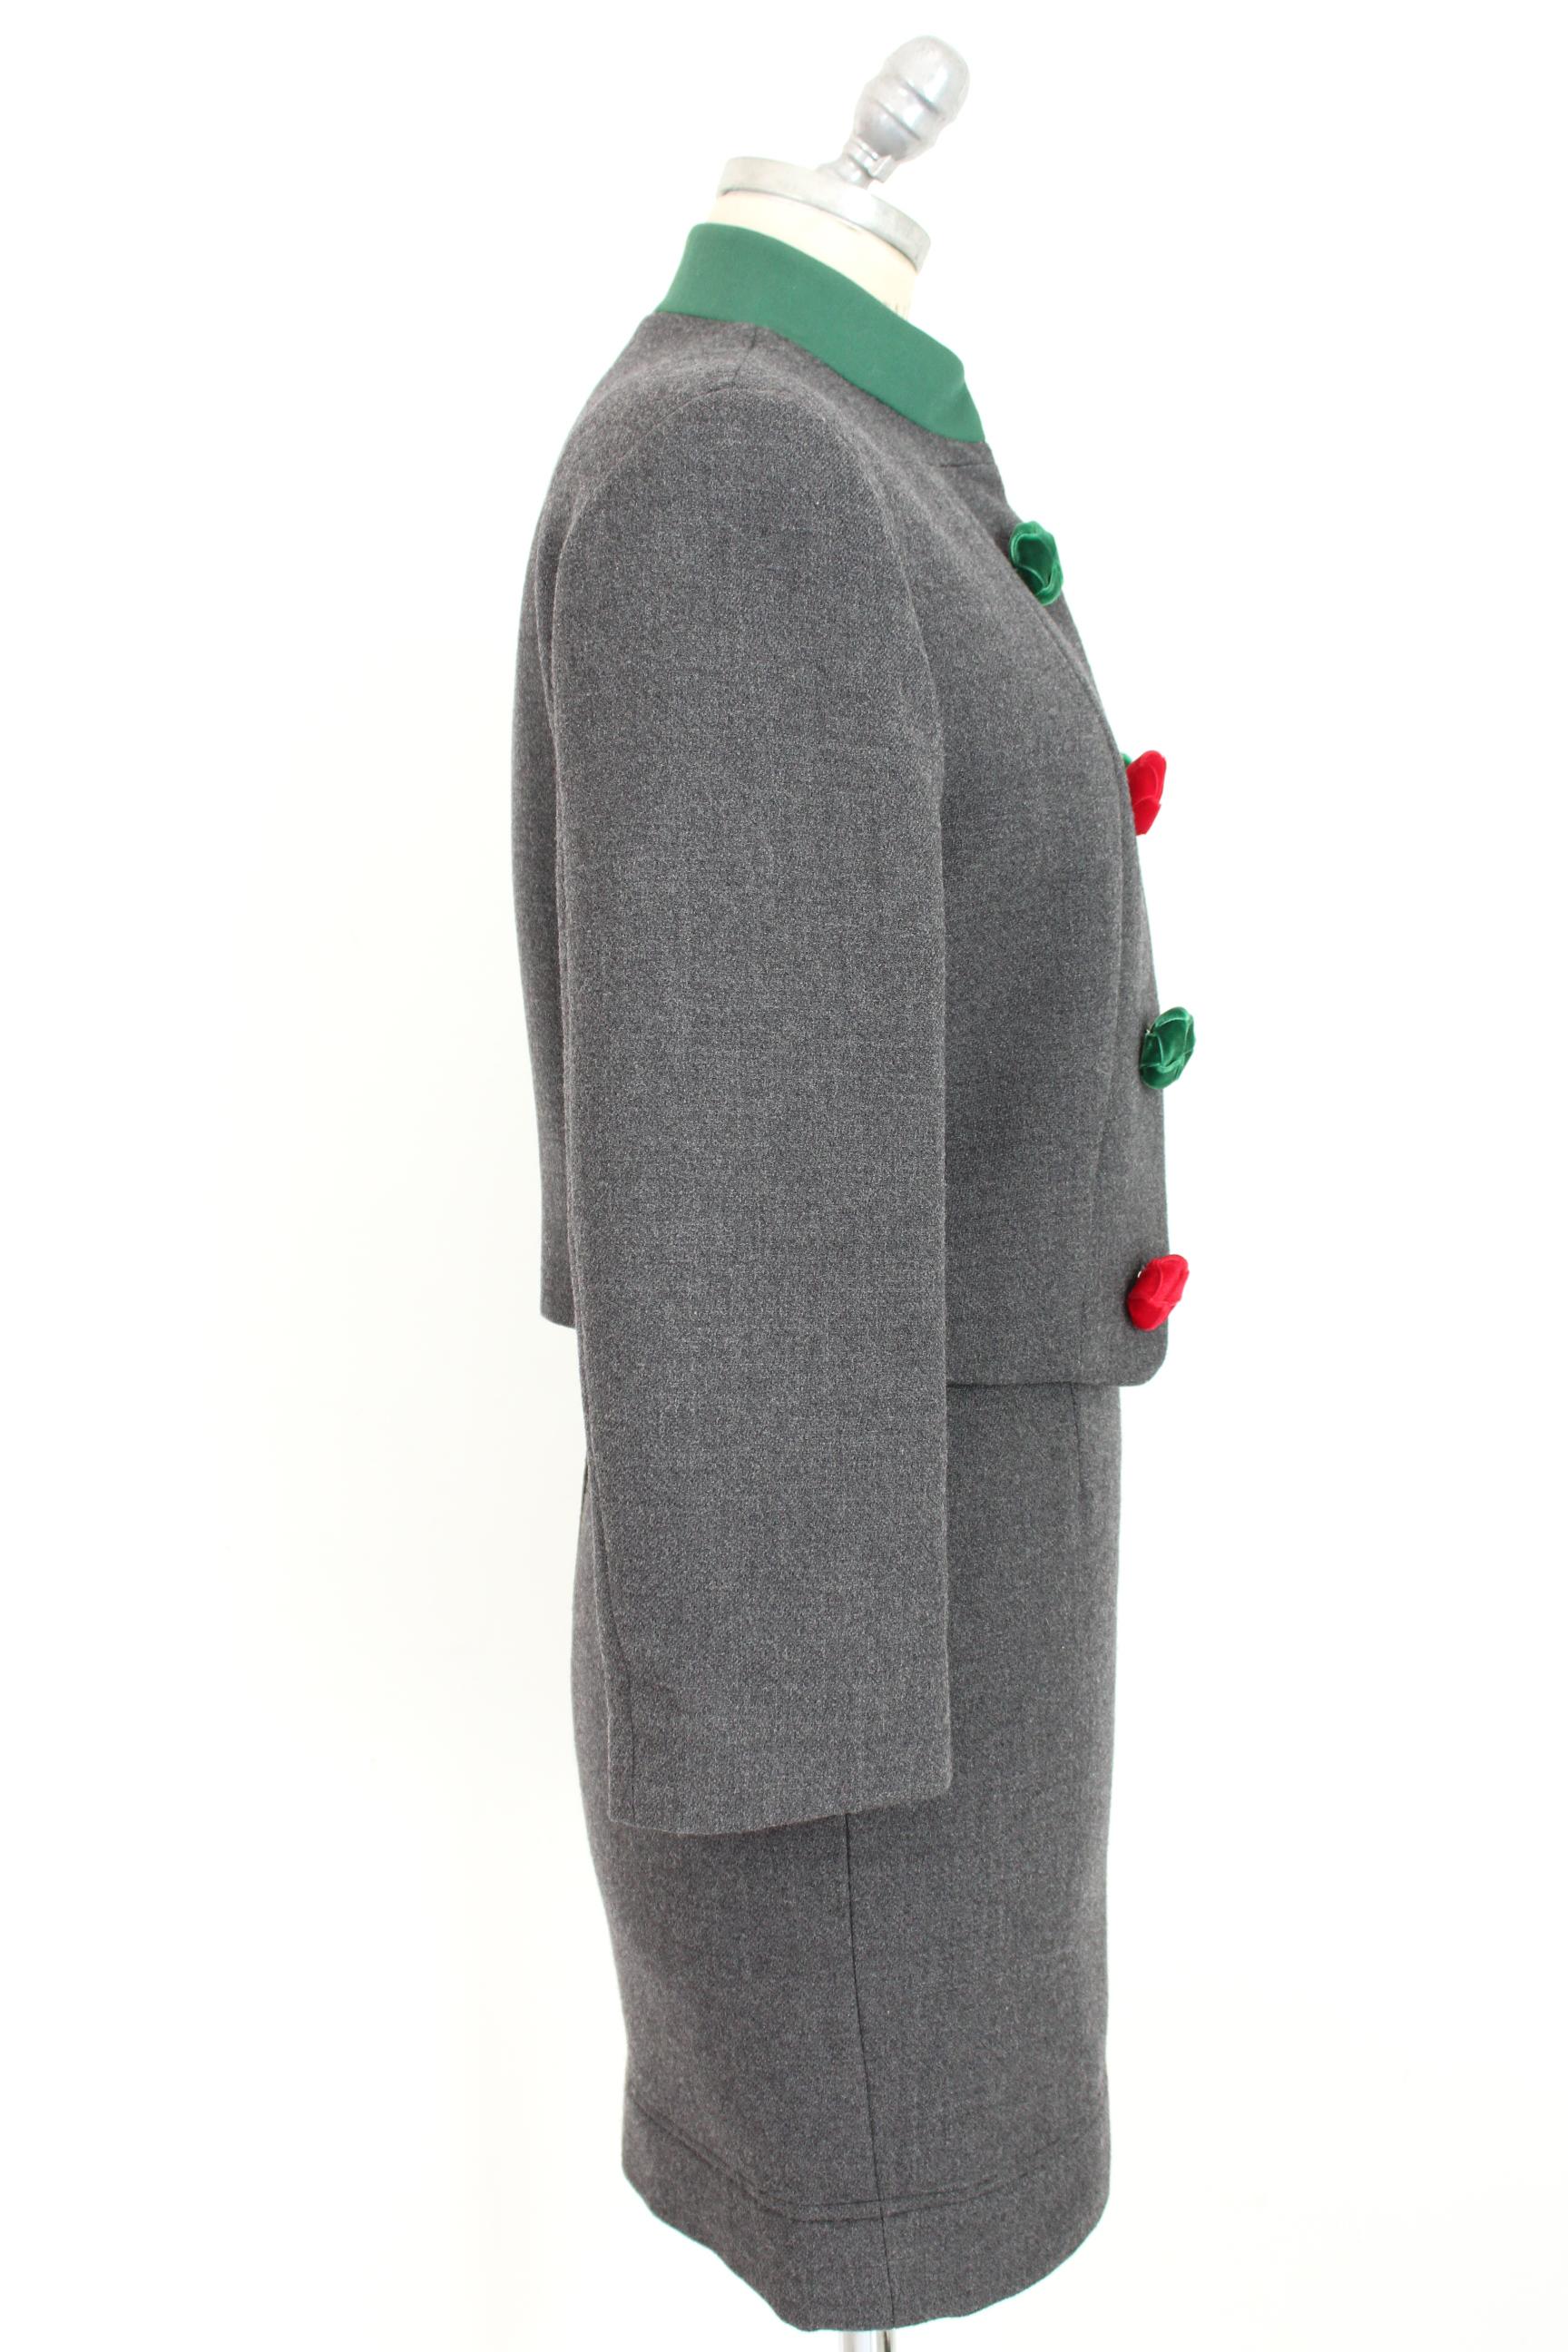 Moschino Gray Wool Pom Pom Suit Skirt and Jacket Dress 1990s In Excellent Condition In Brindisi, Bt